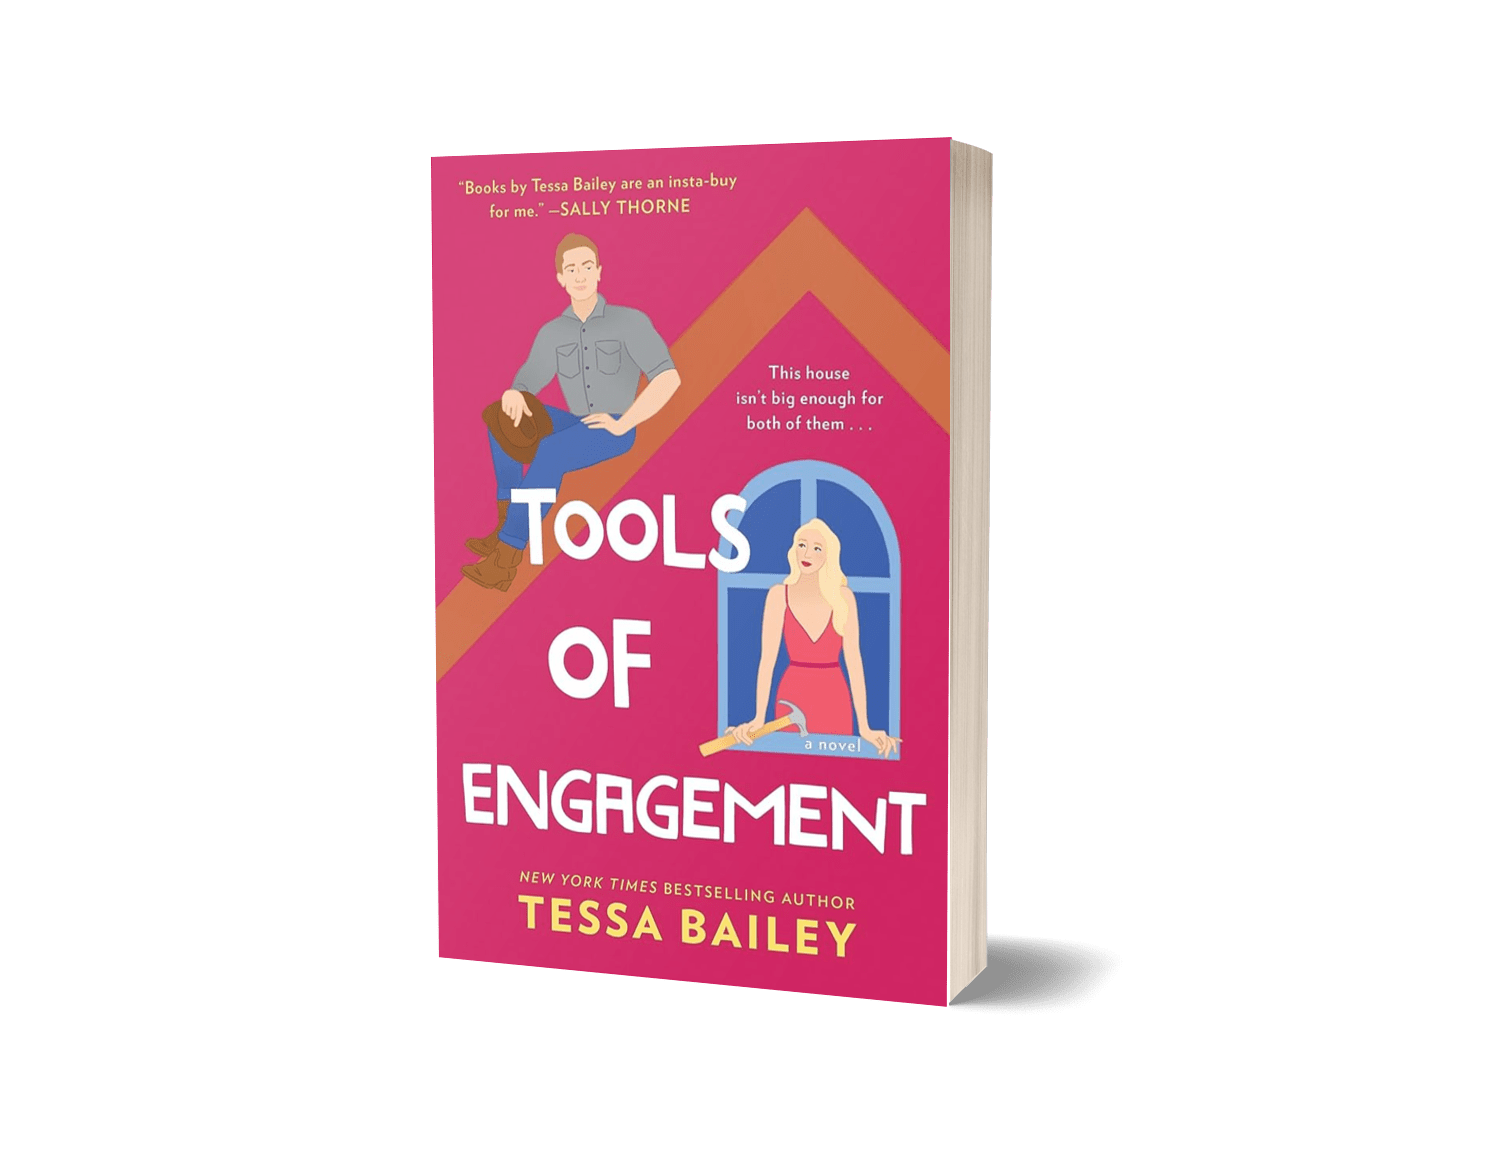 TOOLS OF ENGAGEMENT BY TESSA BAILEY